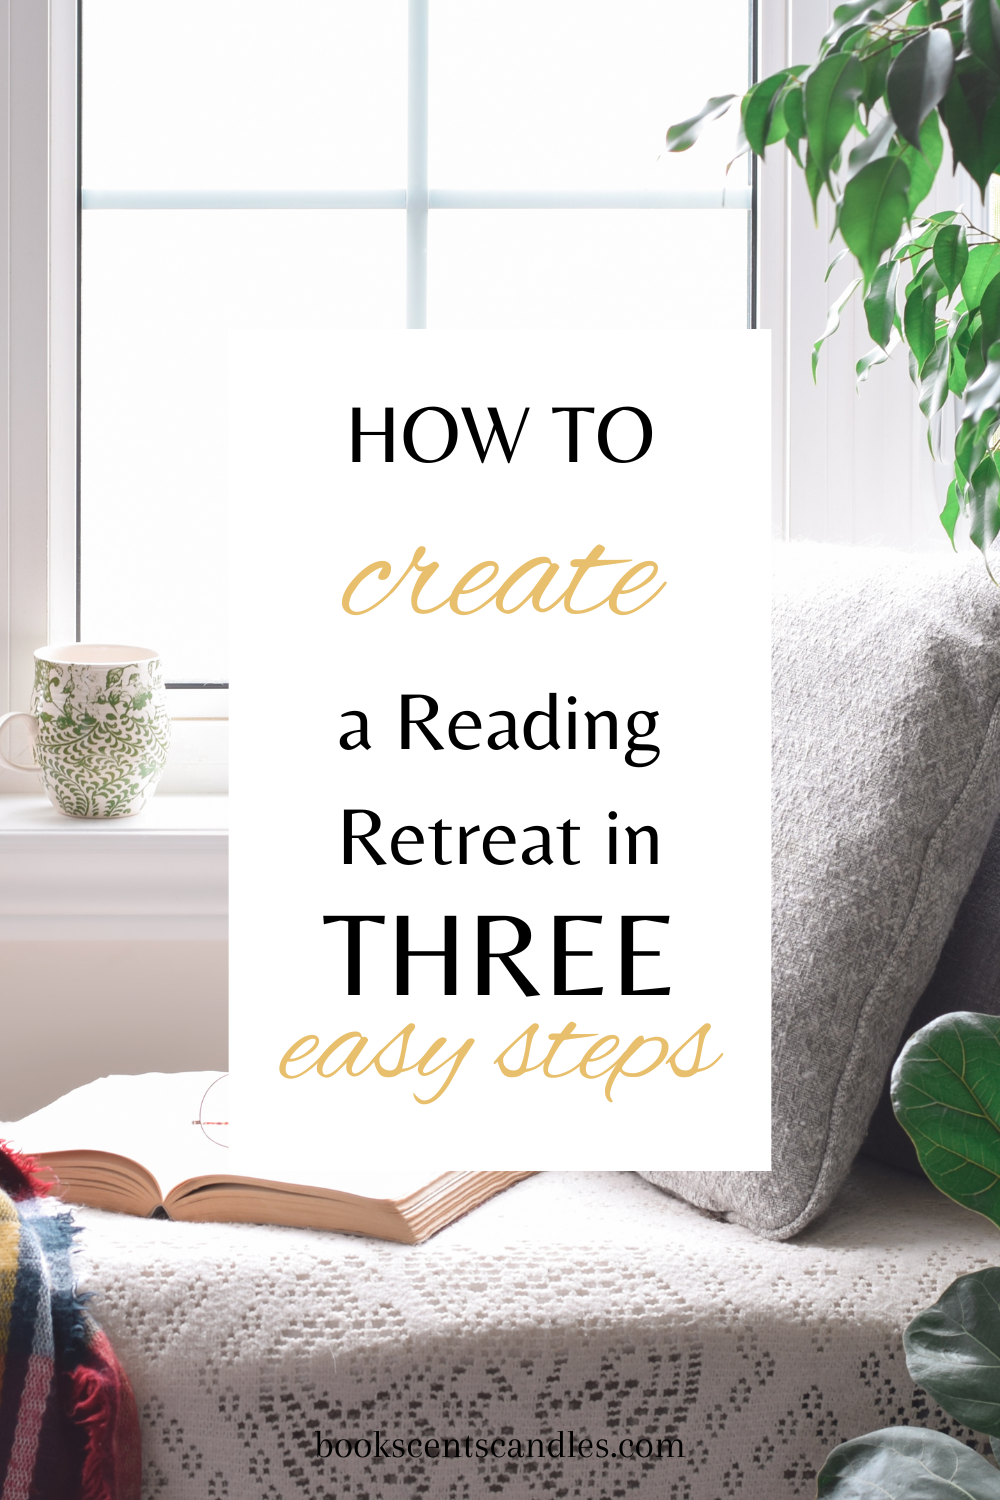 How to create a reading retreat in three easy steps